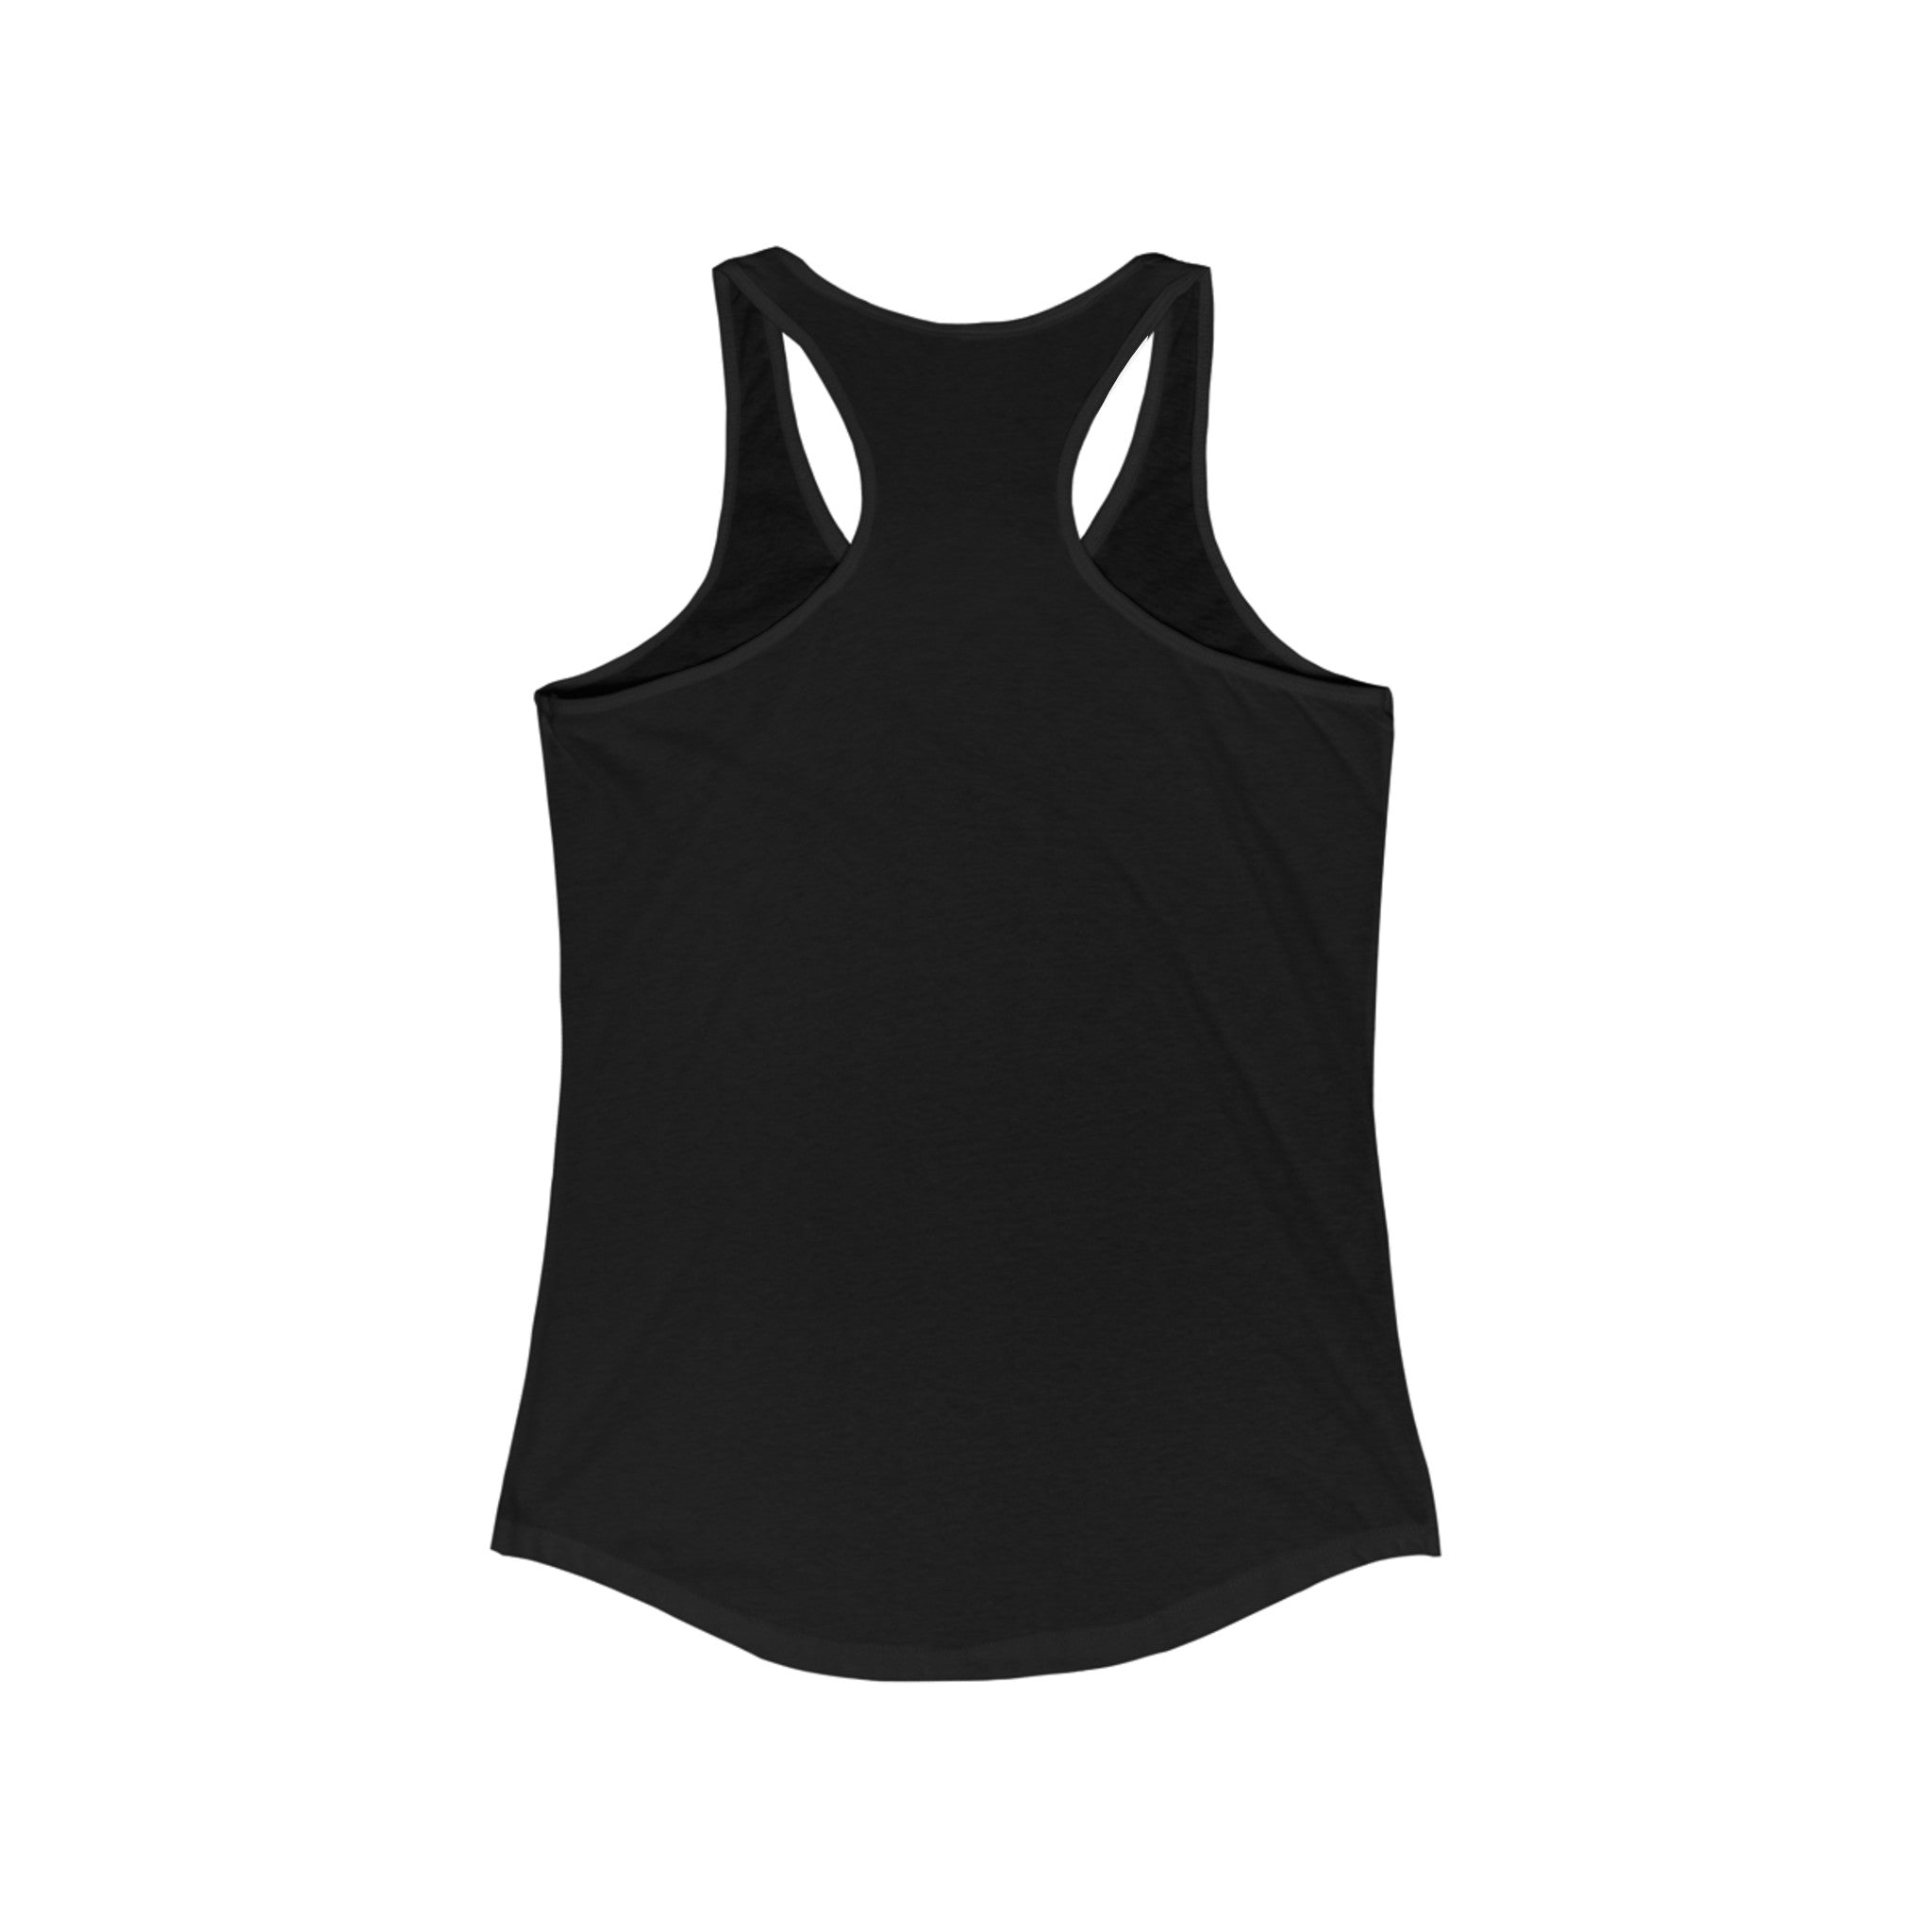 Back view of a plain black Professional Overthinker - Women's Racerback Tank, perfect for an active lifestyle.